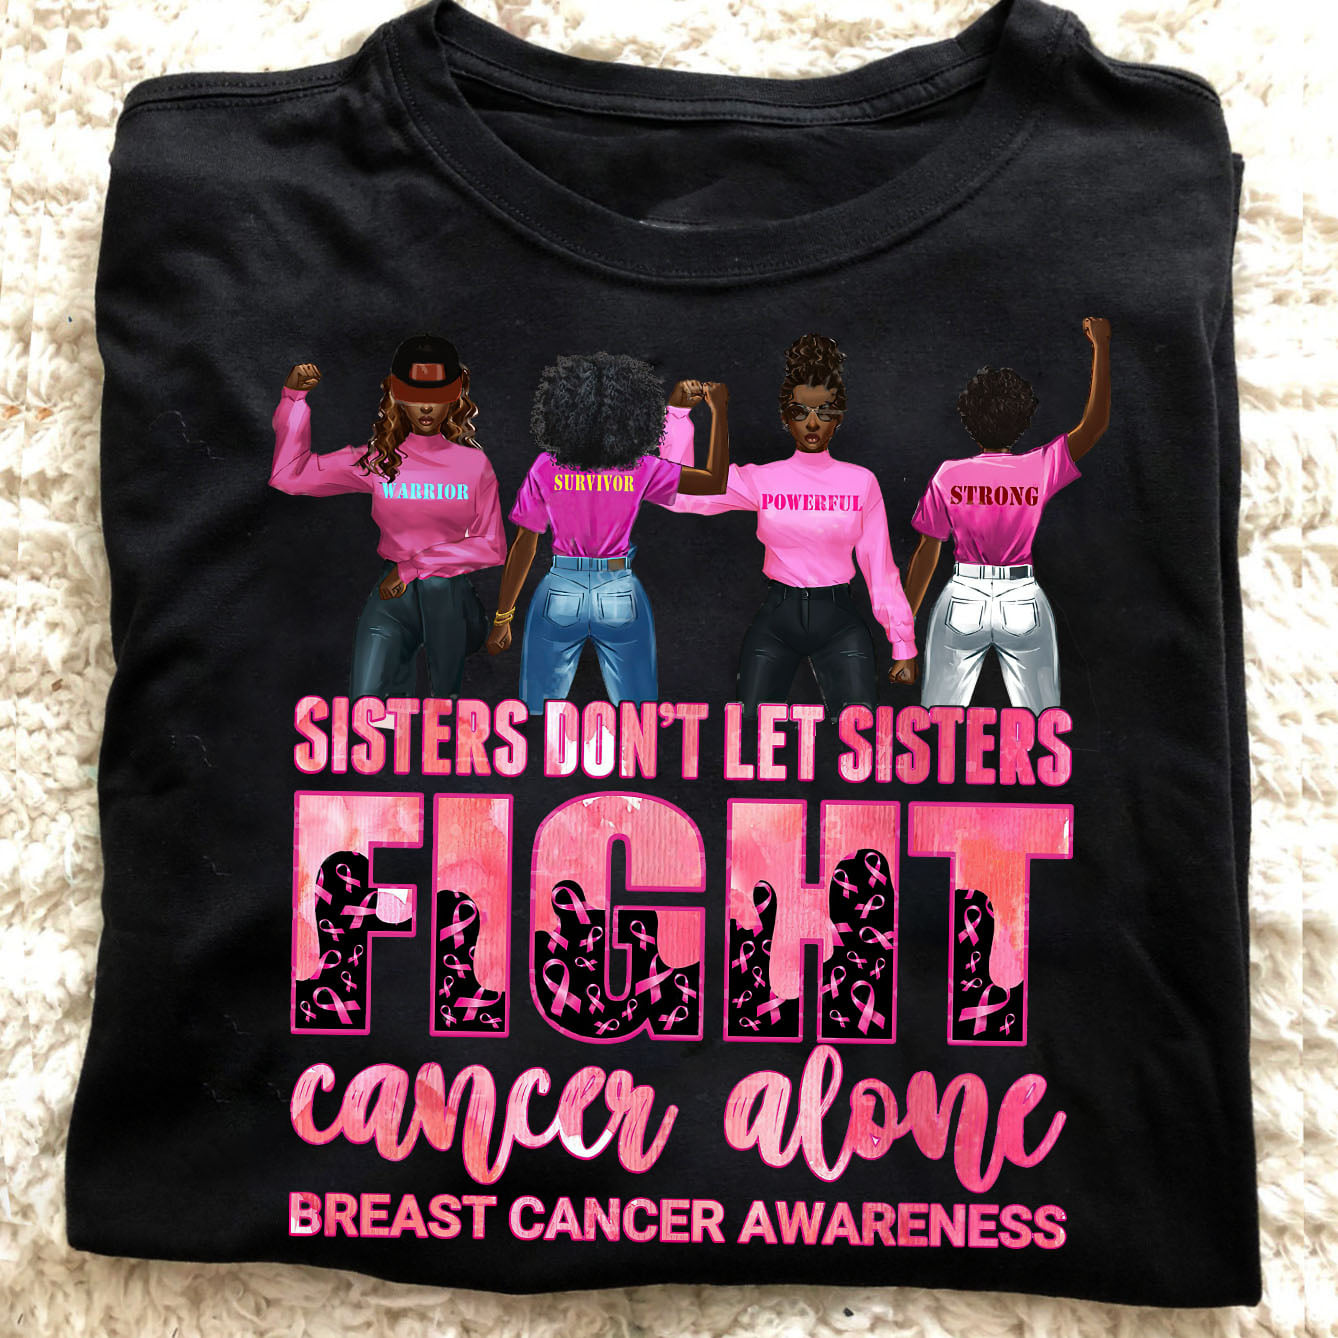 Sisters don't let sisters fight cancer alone - Breast cancer awareness, strong black sisters